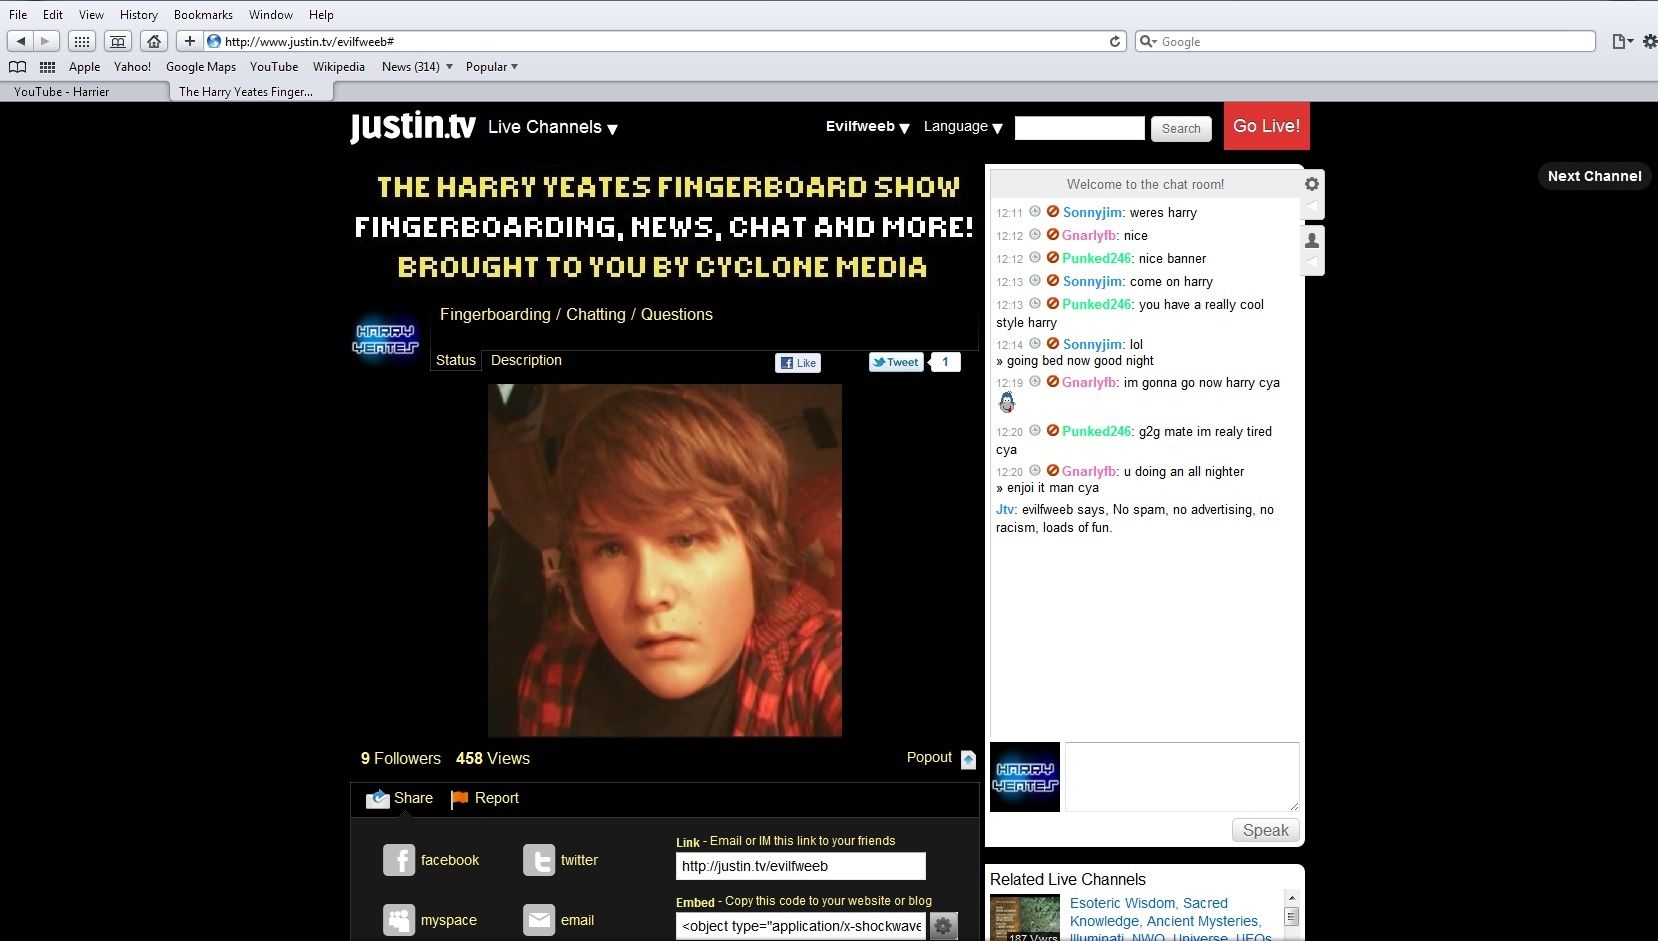 "The Harry Yeates Fingerboard Show" - A Live Fingerboard Stream Justin10